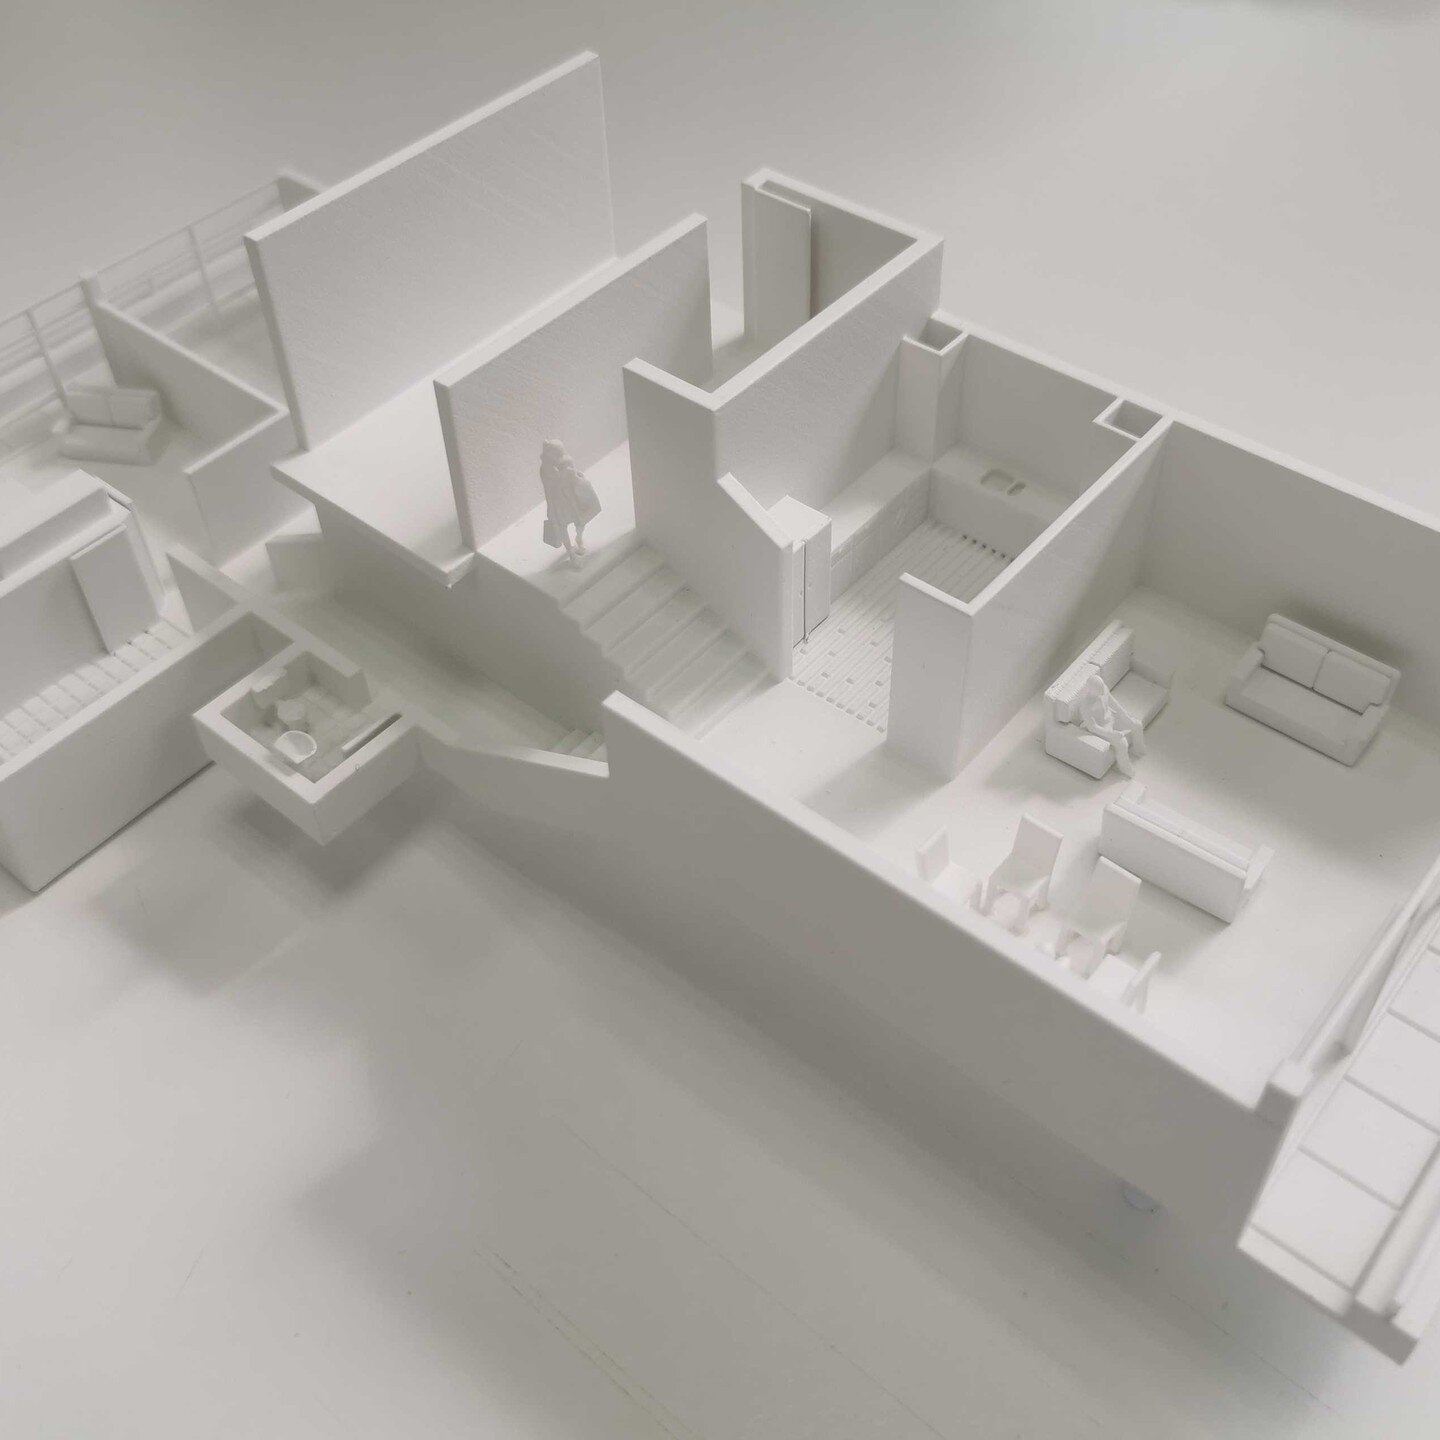 One is of the best ways to show your client's #fitoutinteriors is with a #3dprinted model - gives a feel of space and scale and of course layout. #architecture #architects #modelmaking #3dprinters